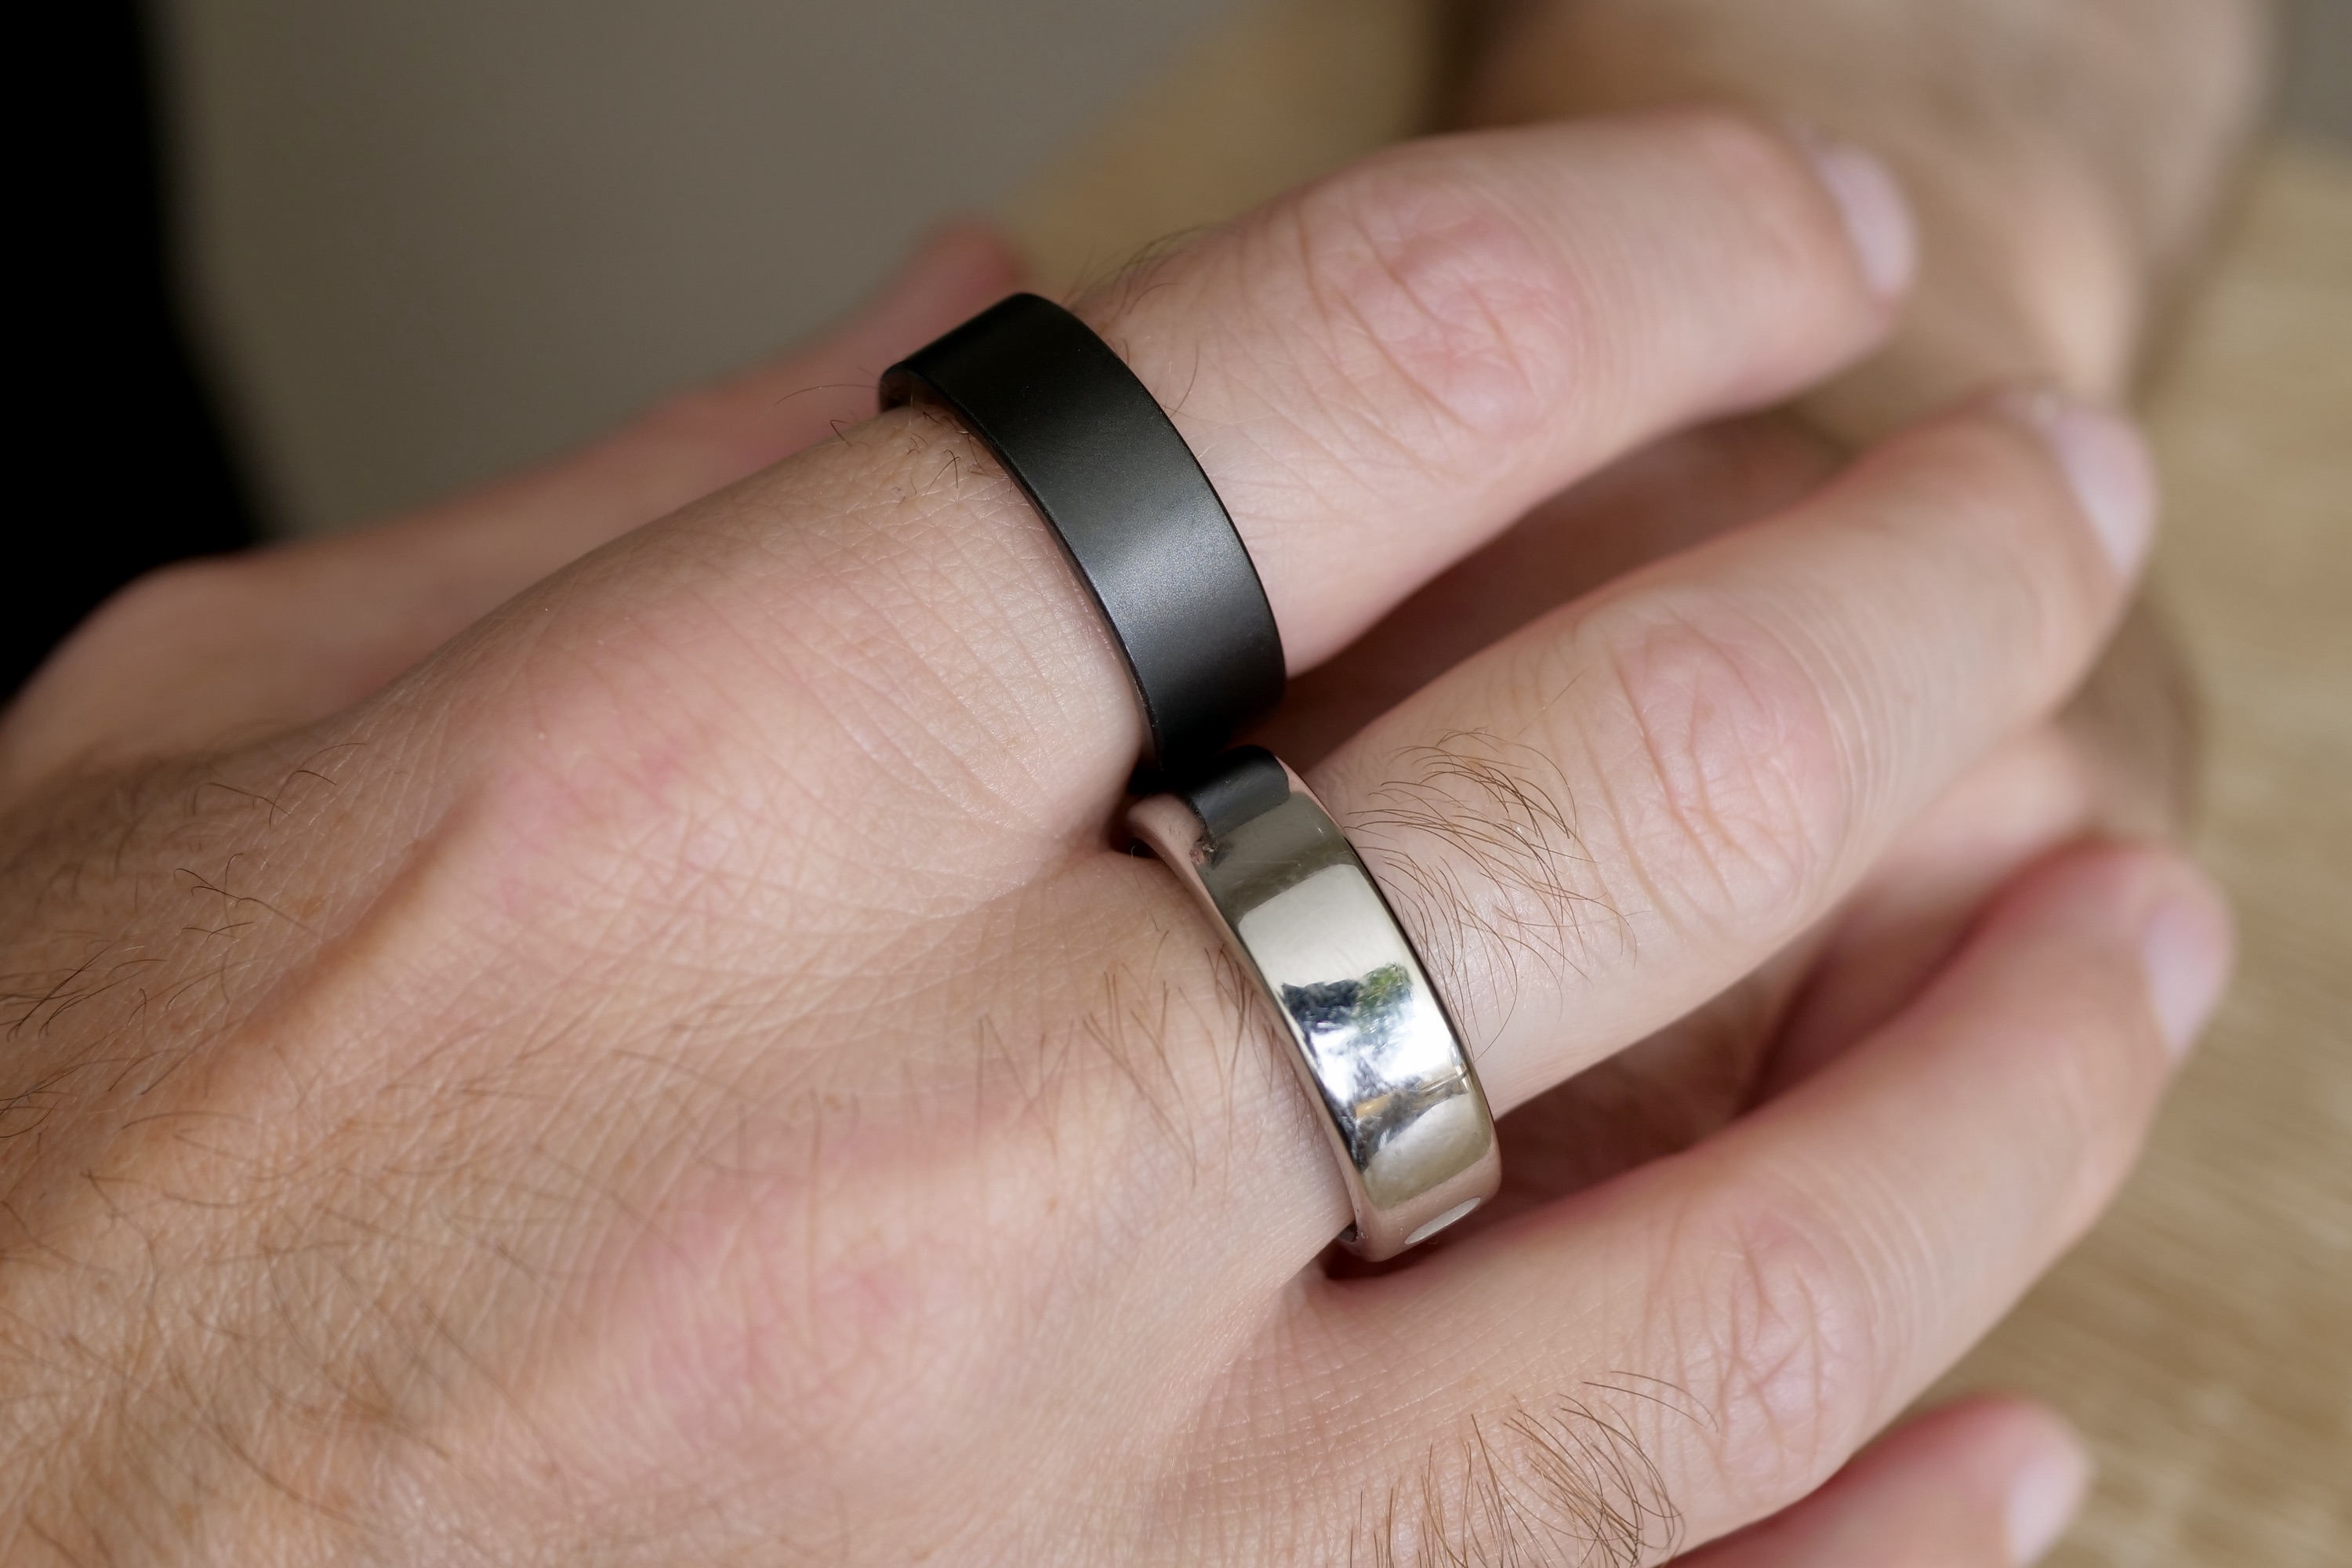 Smart Rings Are Picking Up Where Fitness Trackers Left Off - CNET